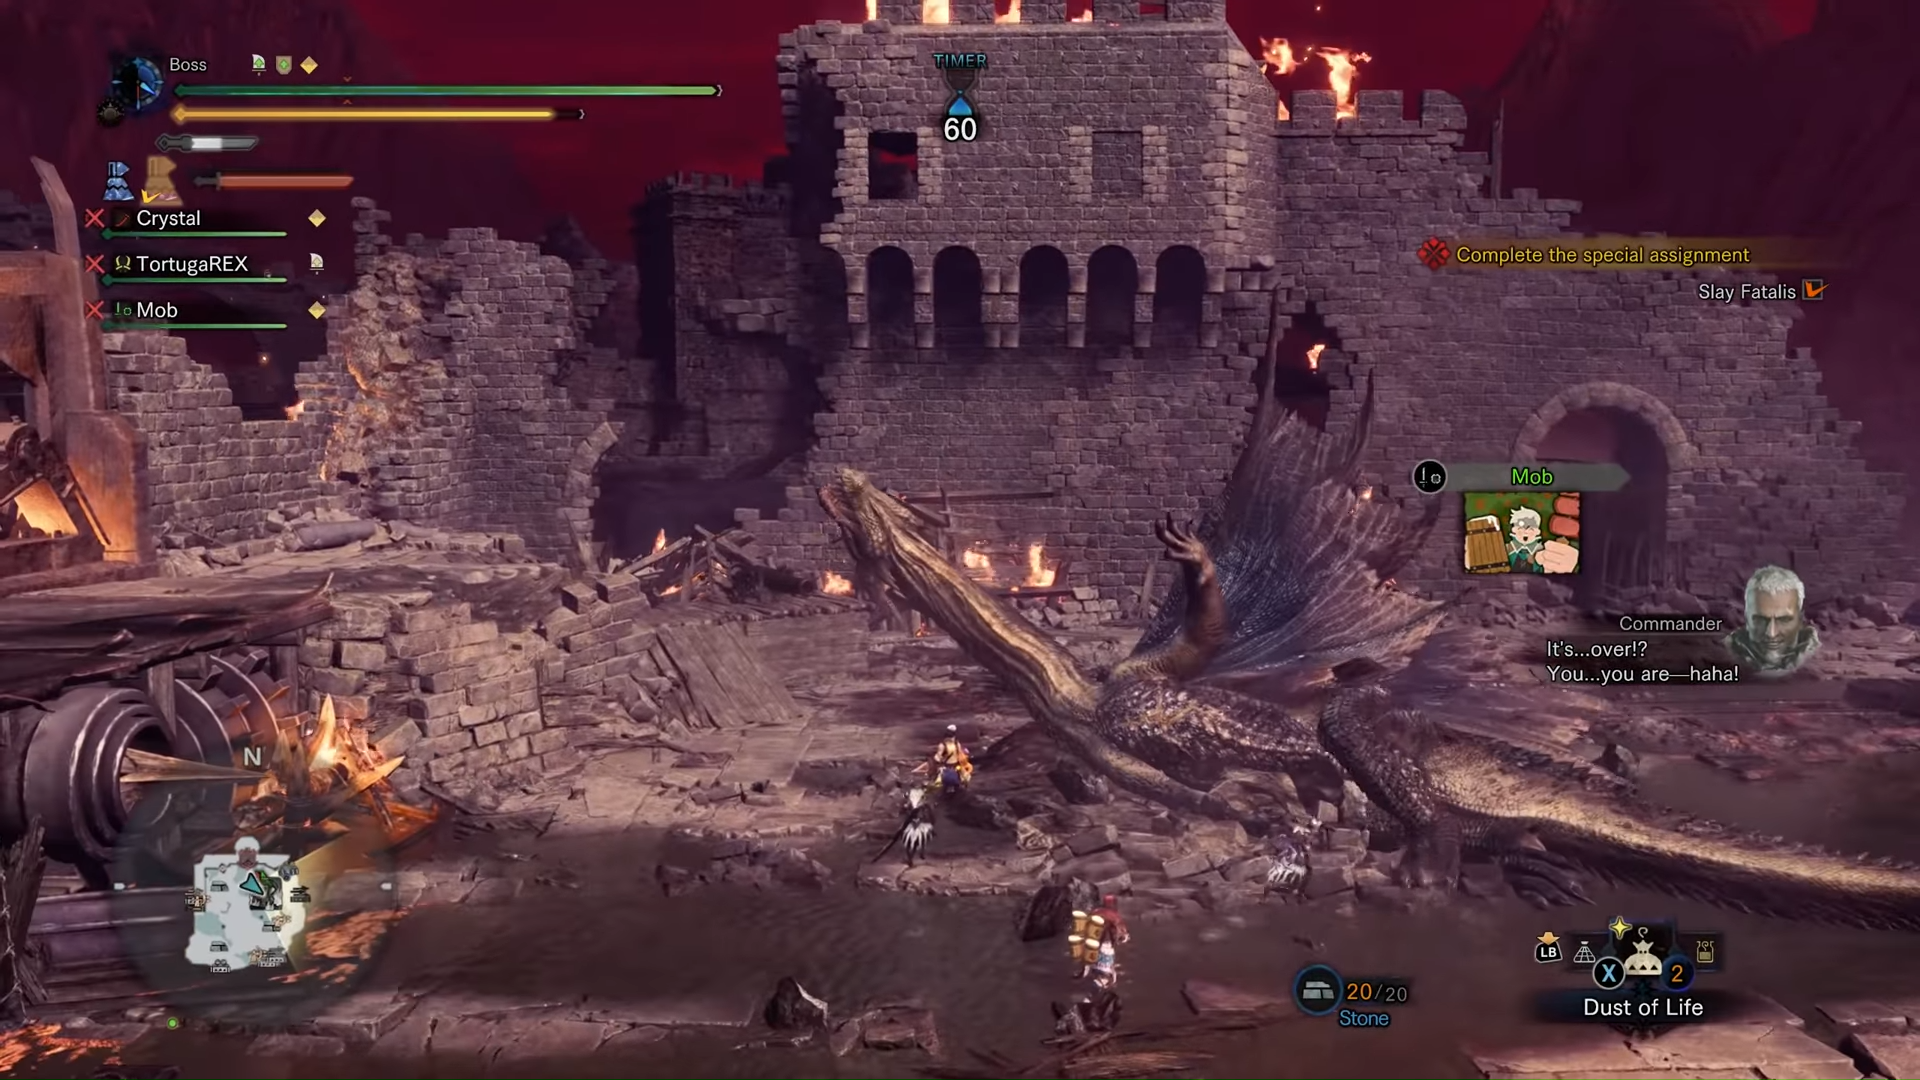 Fatalis crashed into ground by ruined castle wall